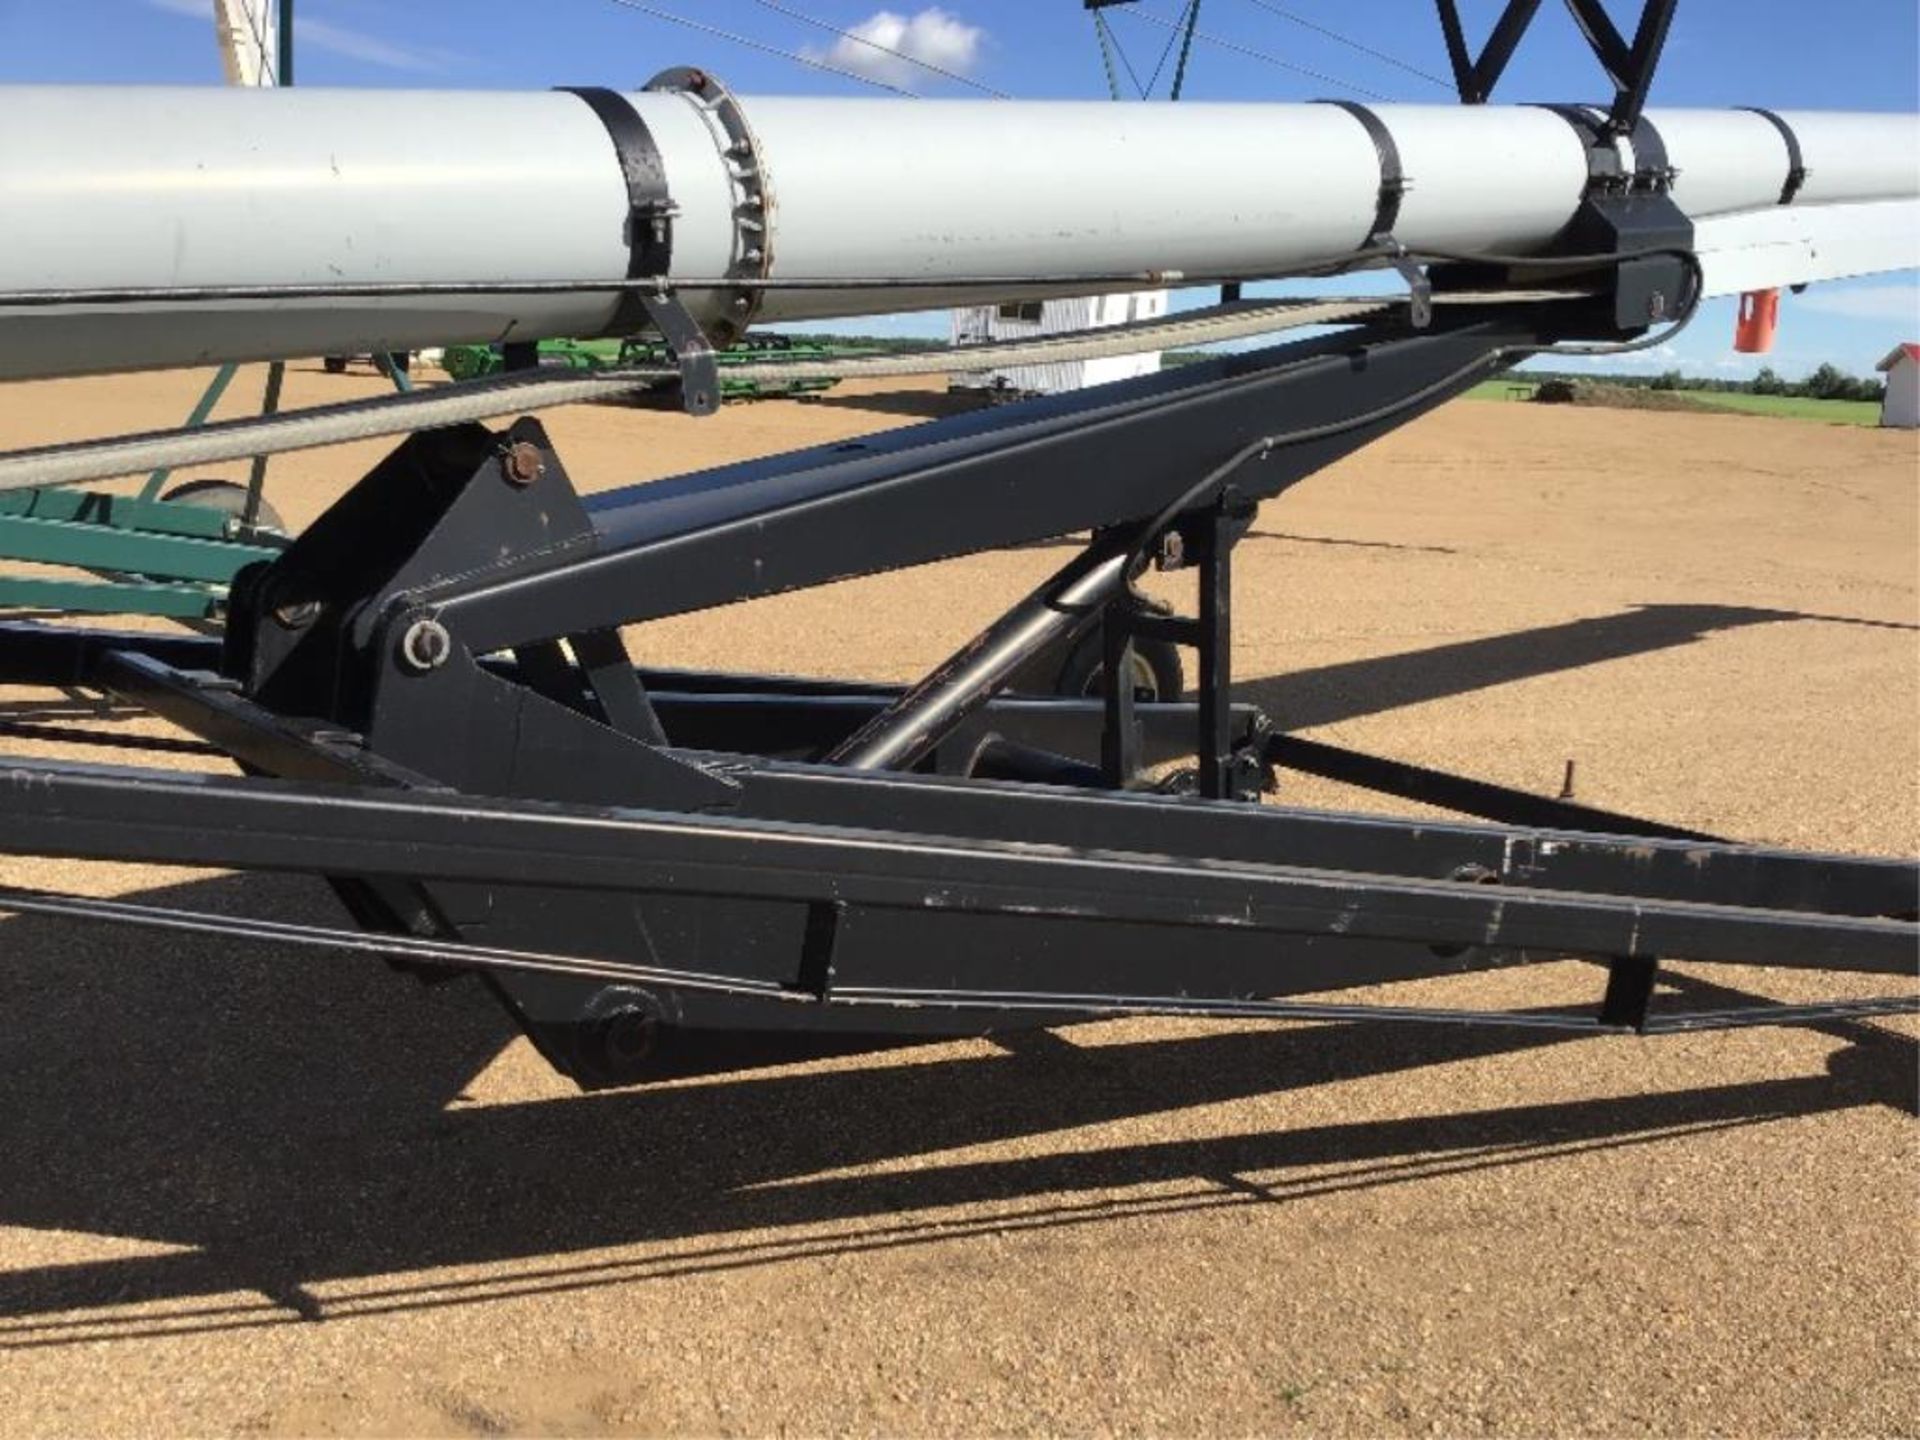 Convey All 14 X 65Ft PTO Drive Grain Conveyor s/n 7897874 540PTO, c/w Brand New Belt valued at $3, - Image 6 of 11